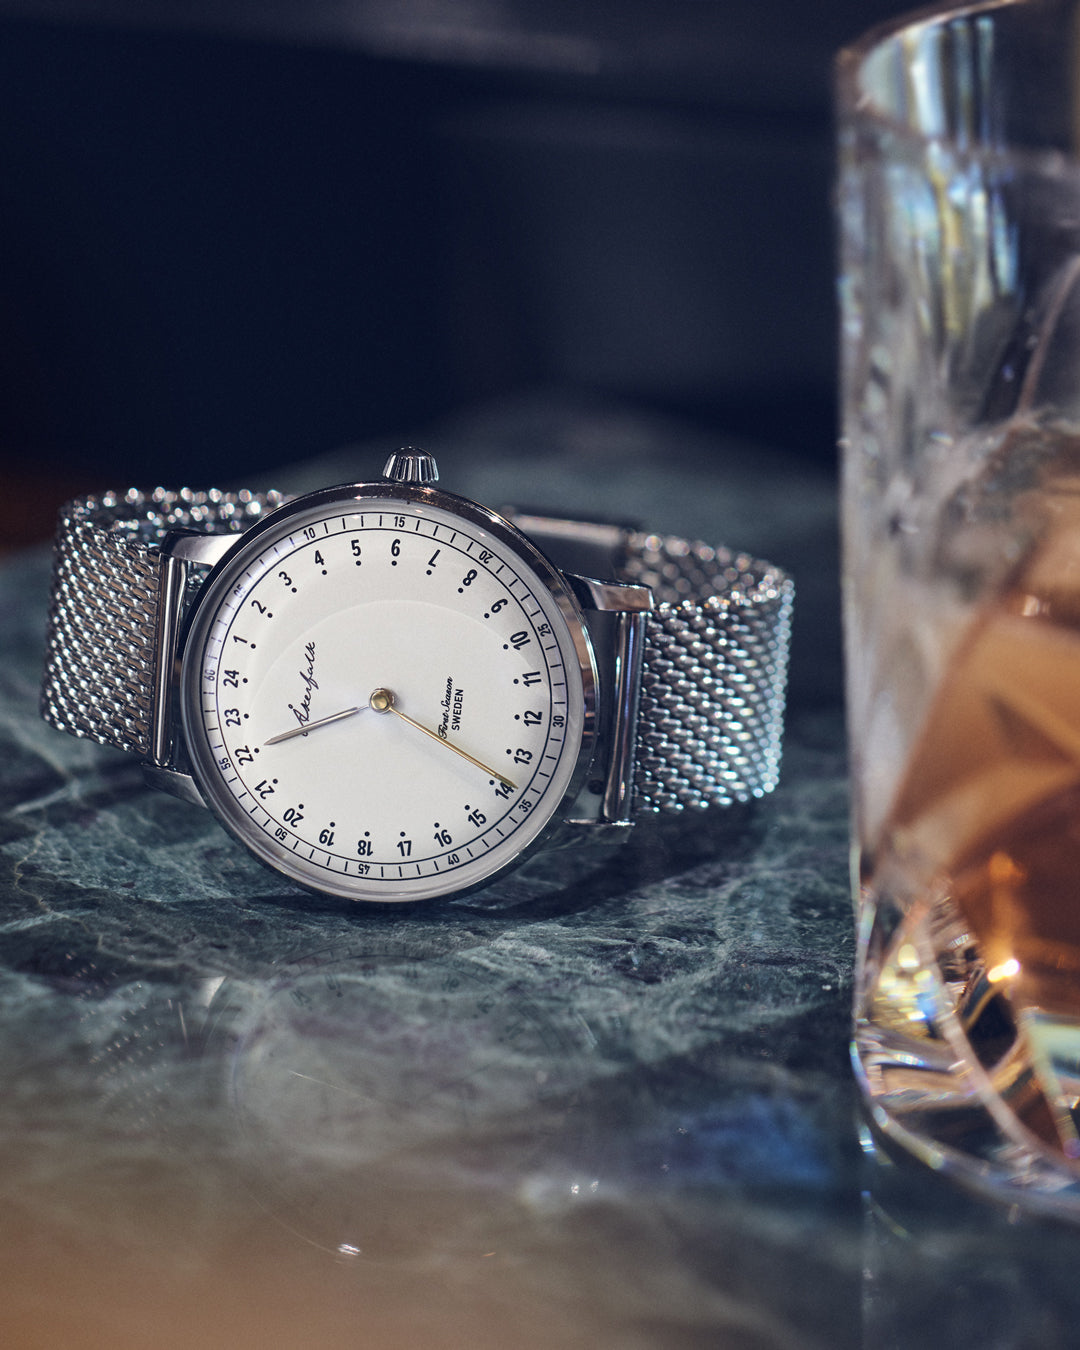 Discovering Affordable Quality in Wristwatches: Insights from Akerfalk's CEO, Mikael Soderberg